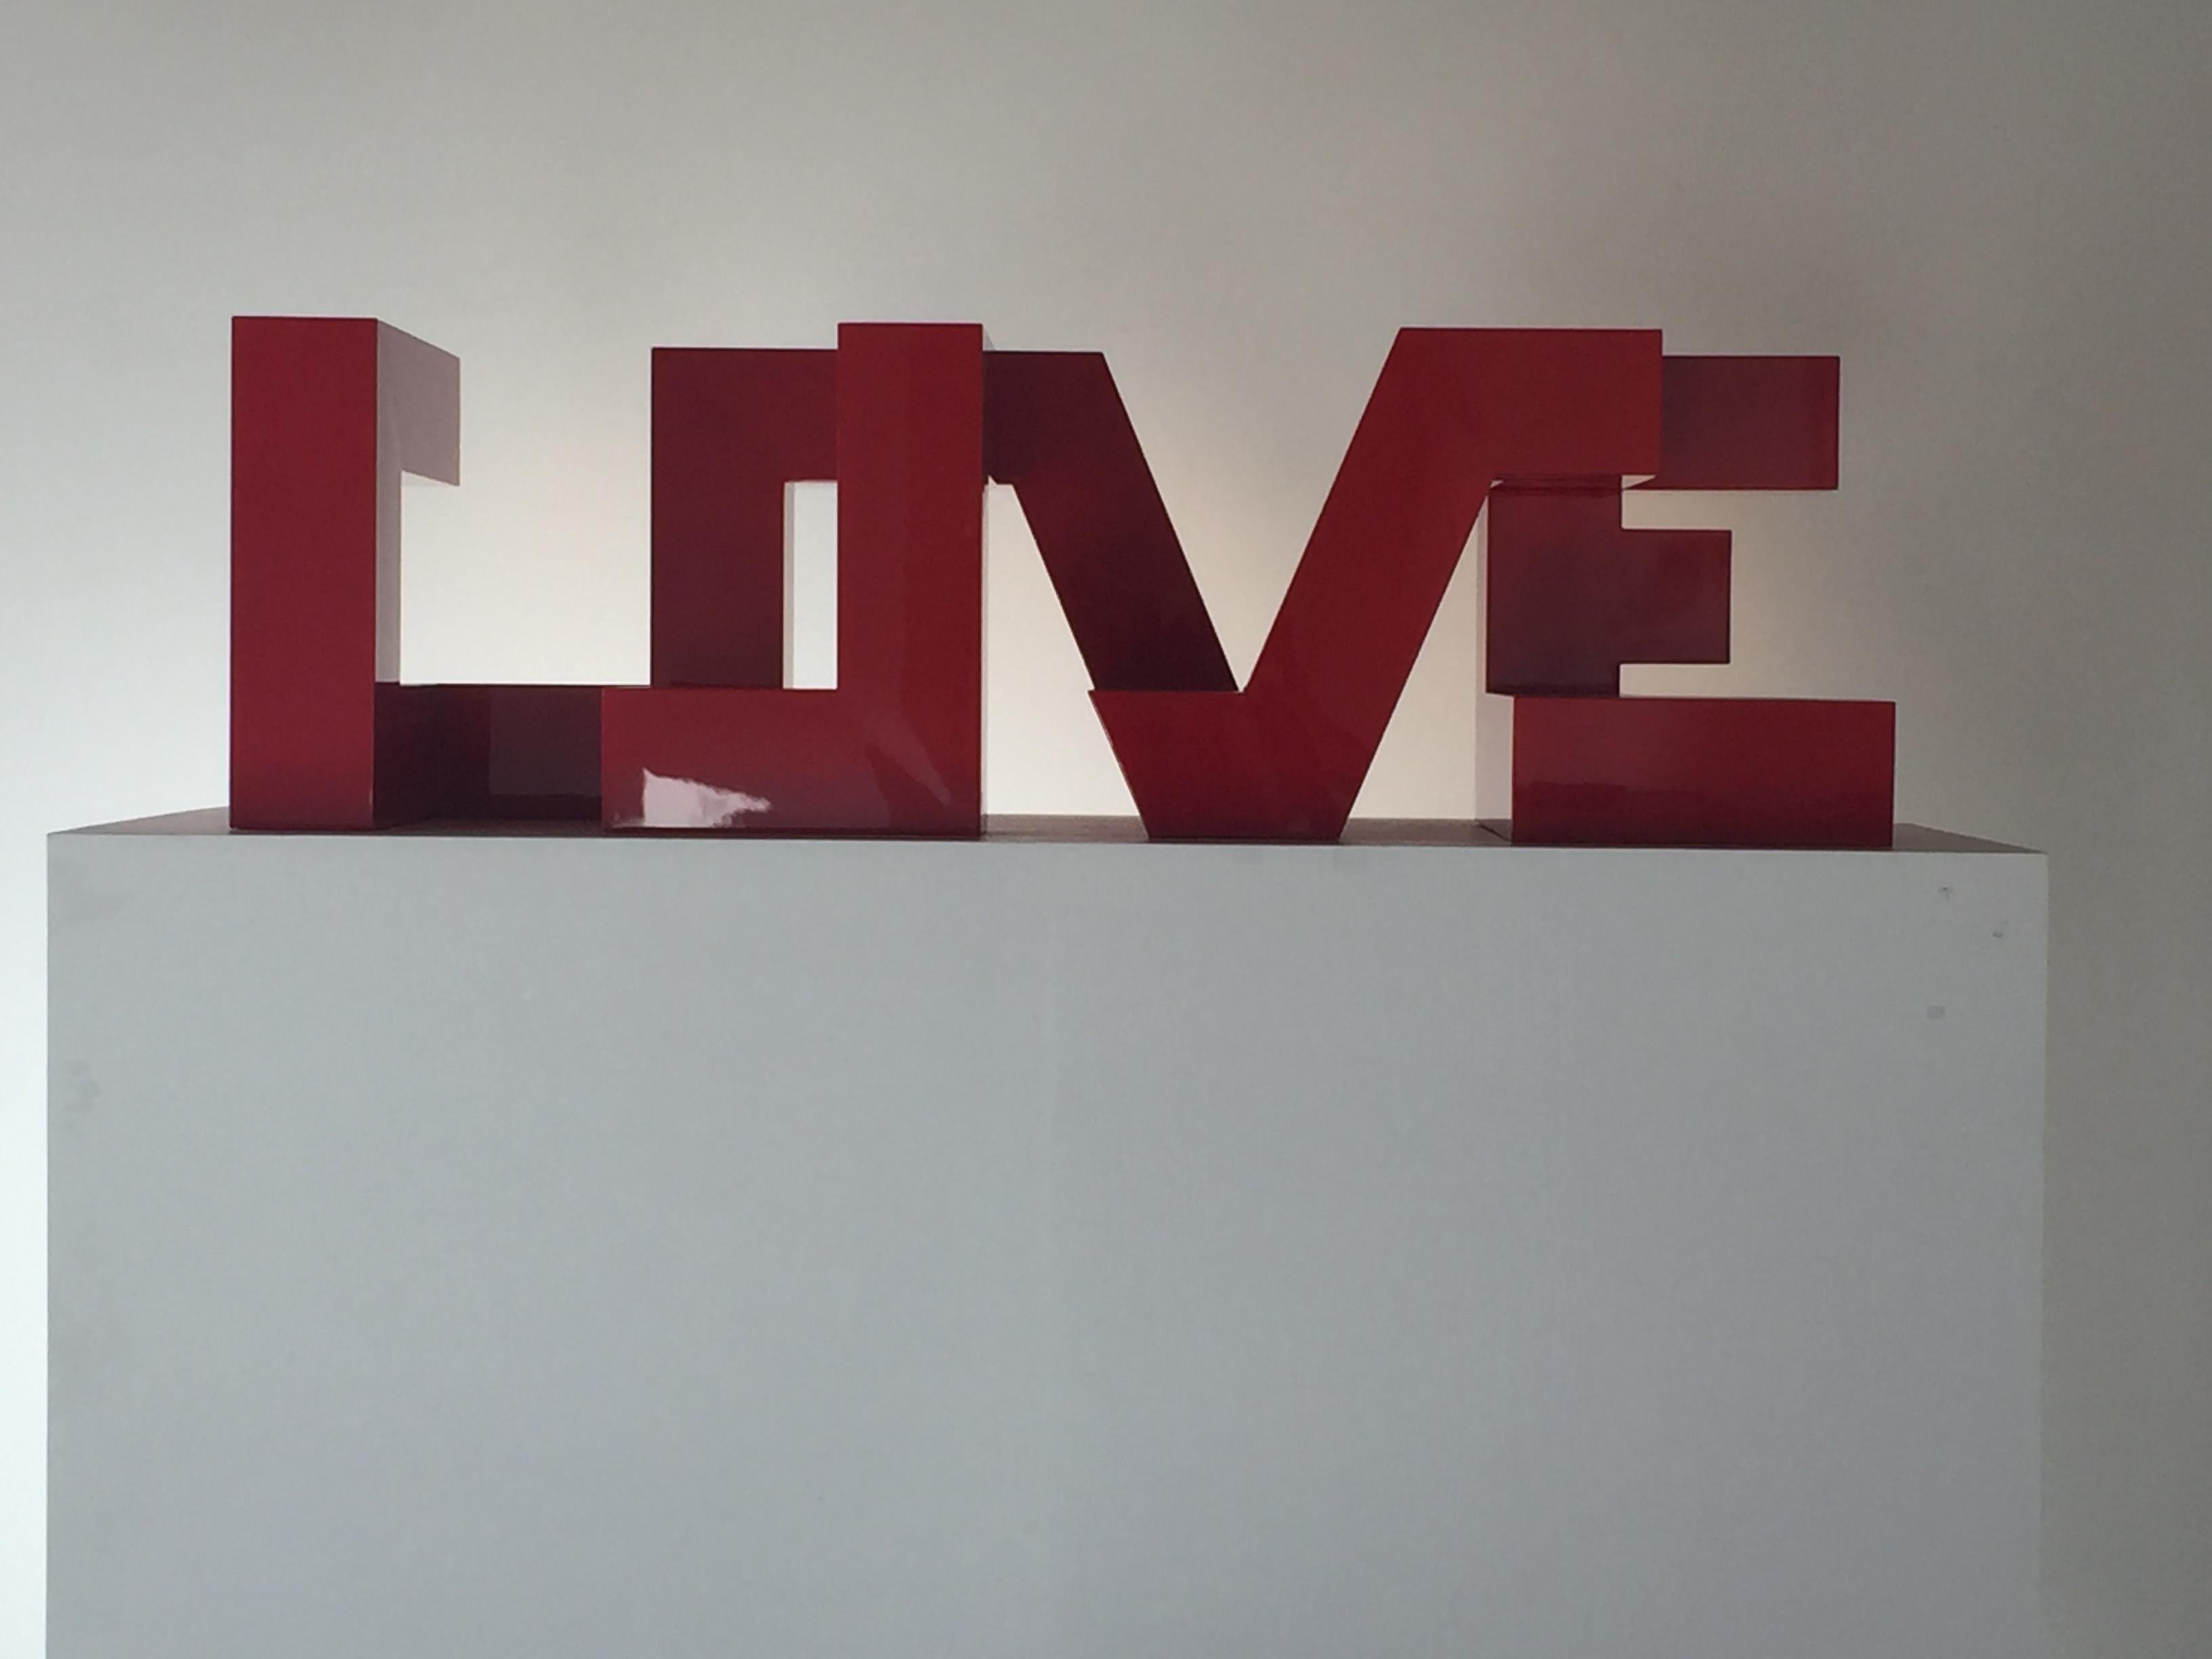 The Art of Finding Love - Red Abstract Sculpture by Michael Kalish